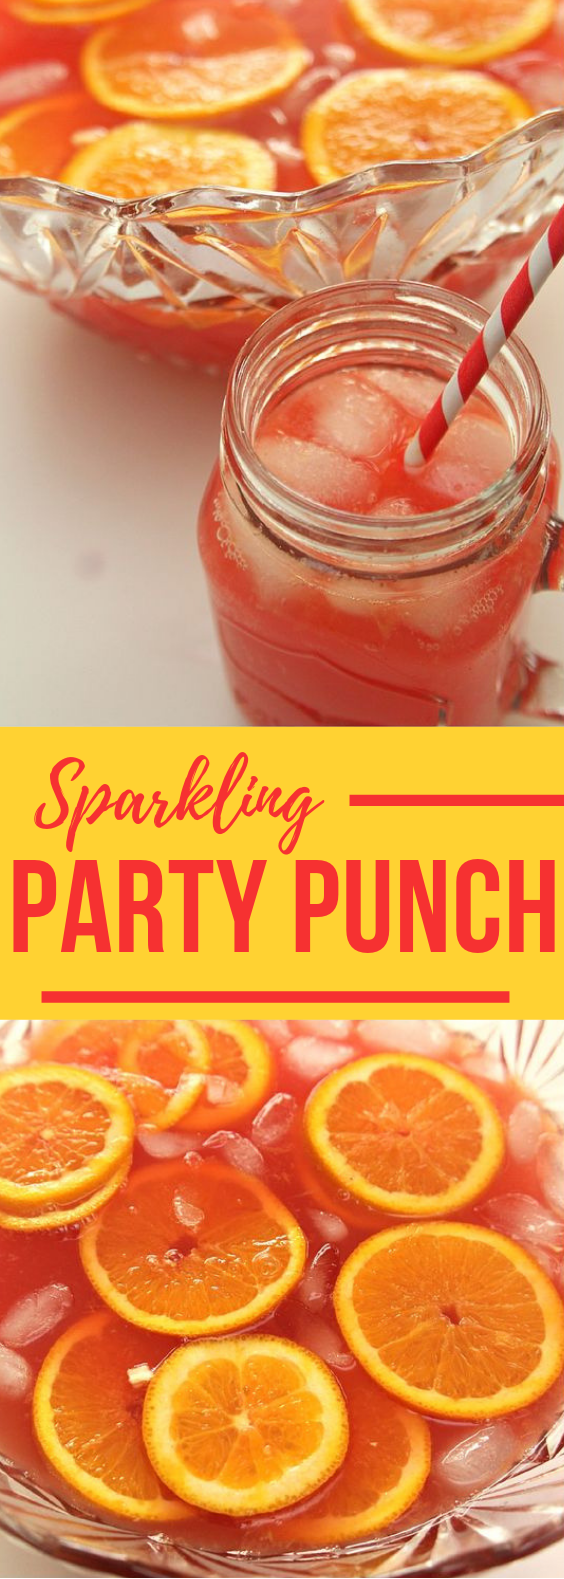 SPARKLING RED PARTY PUNCH